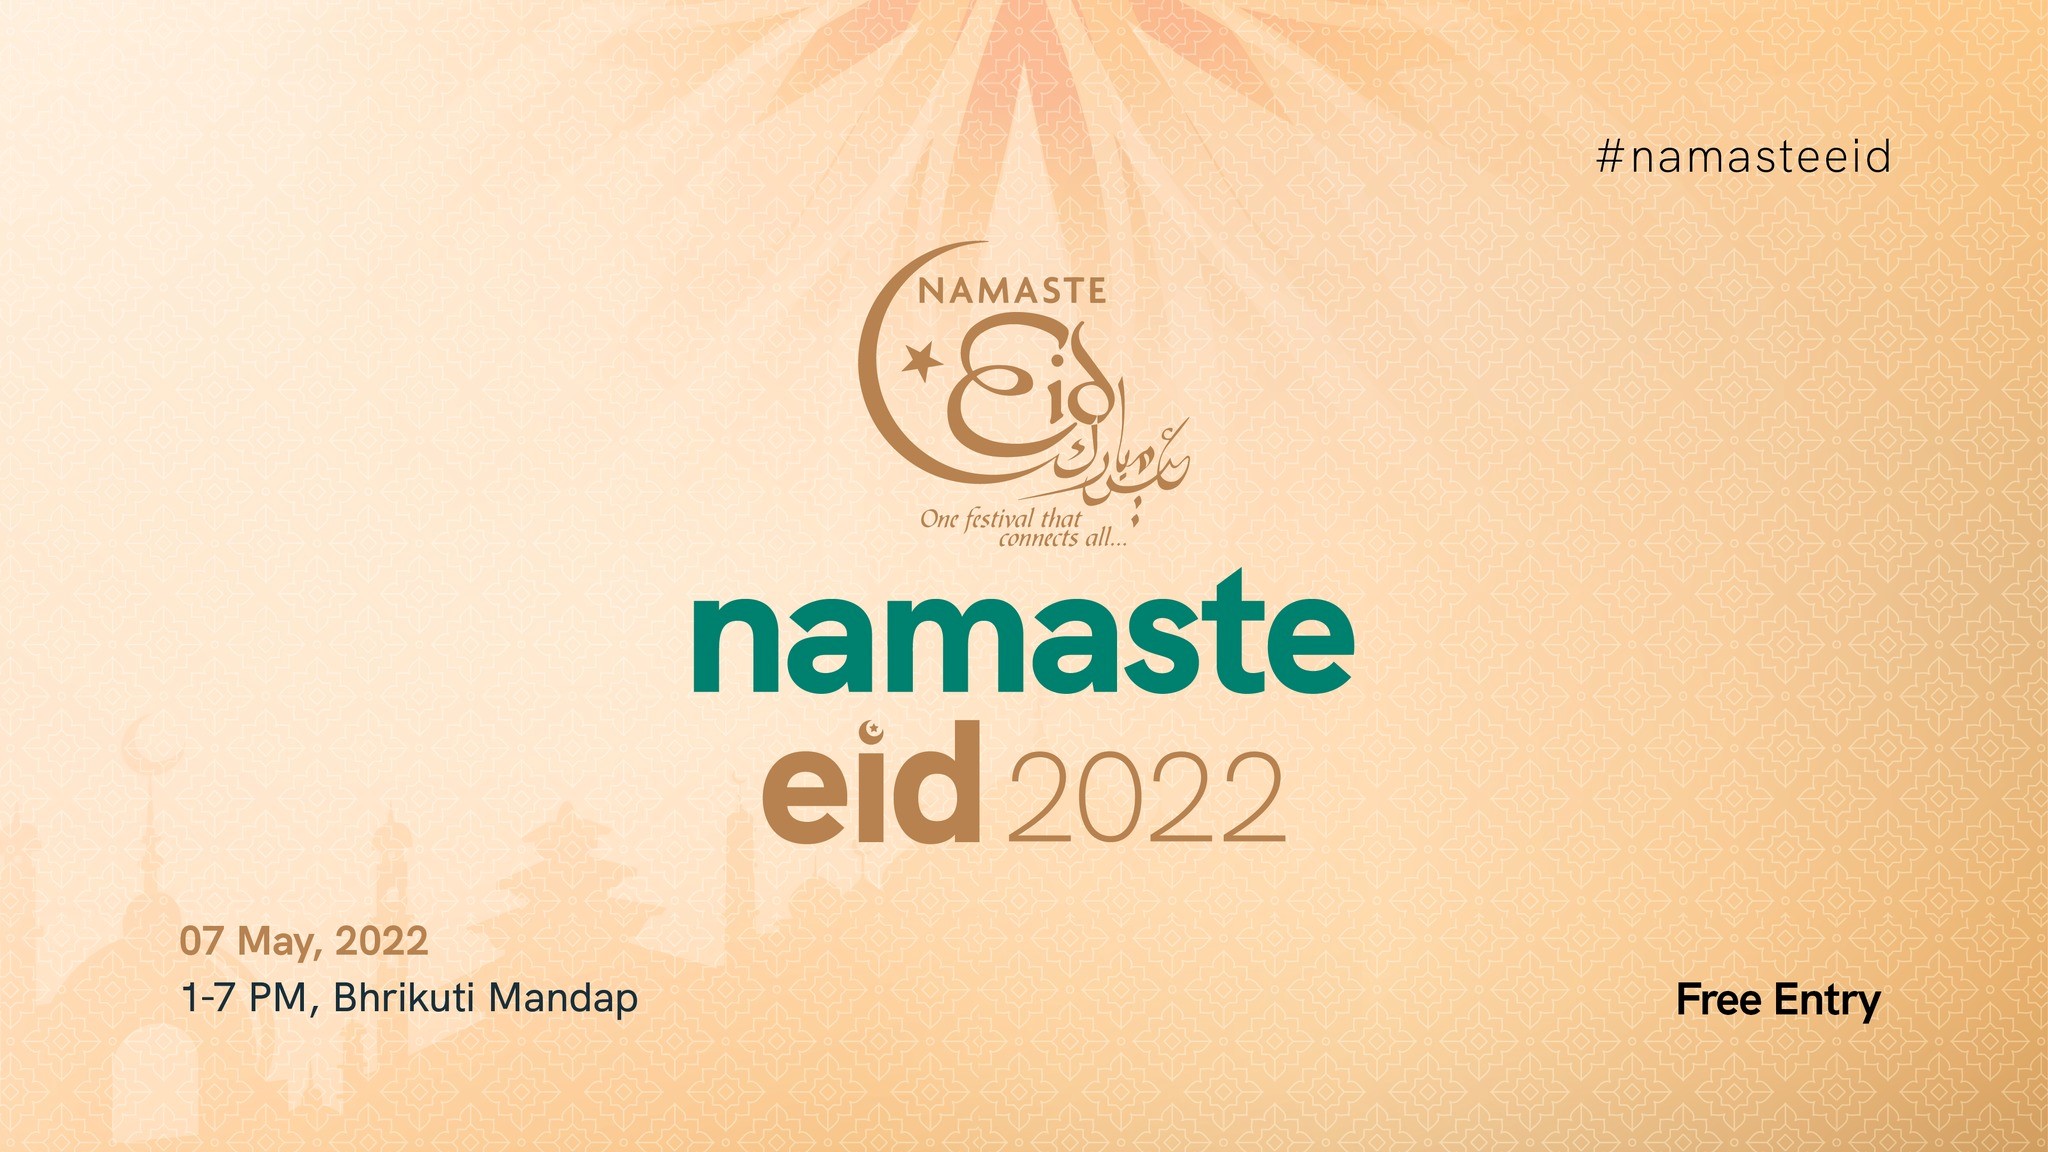 Namaste Eid fest concludes with a great success